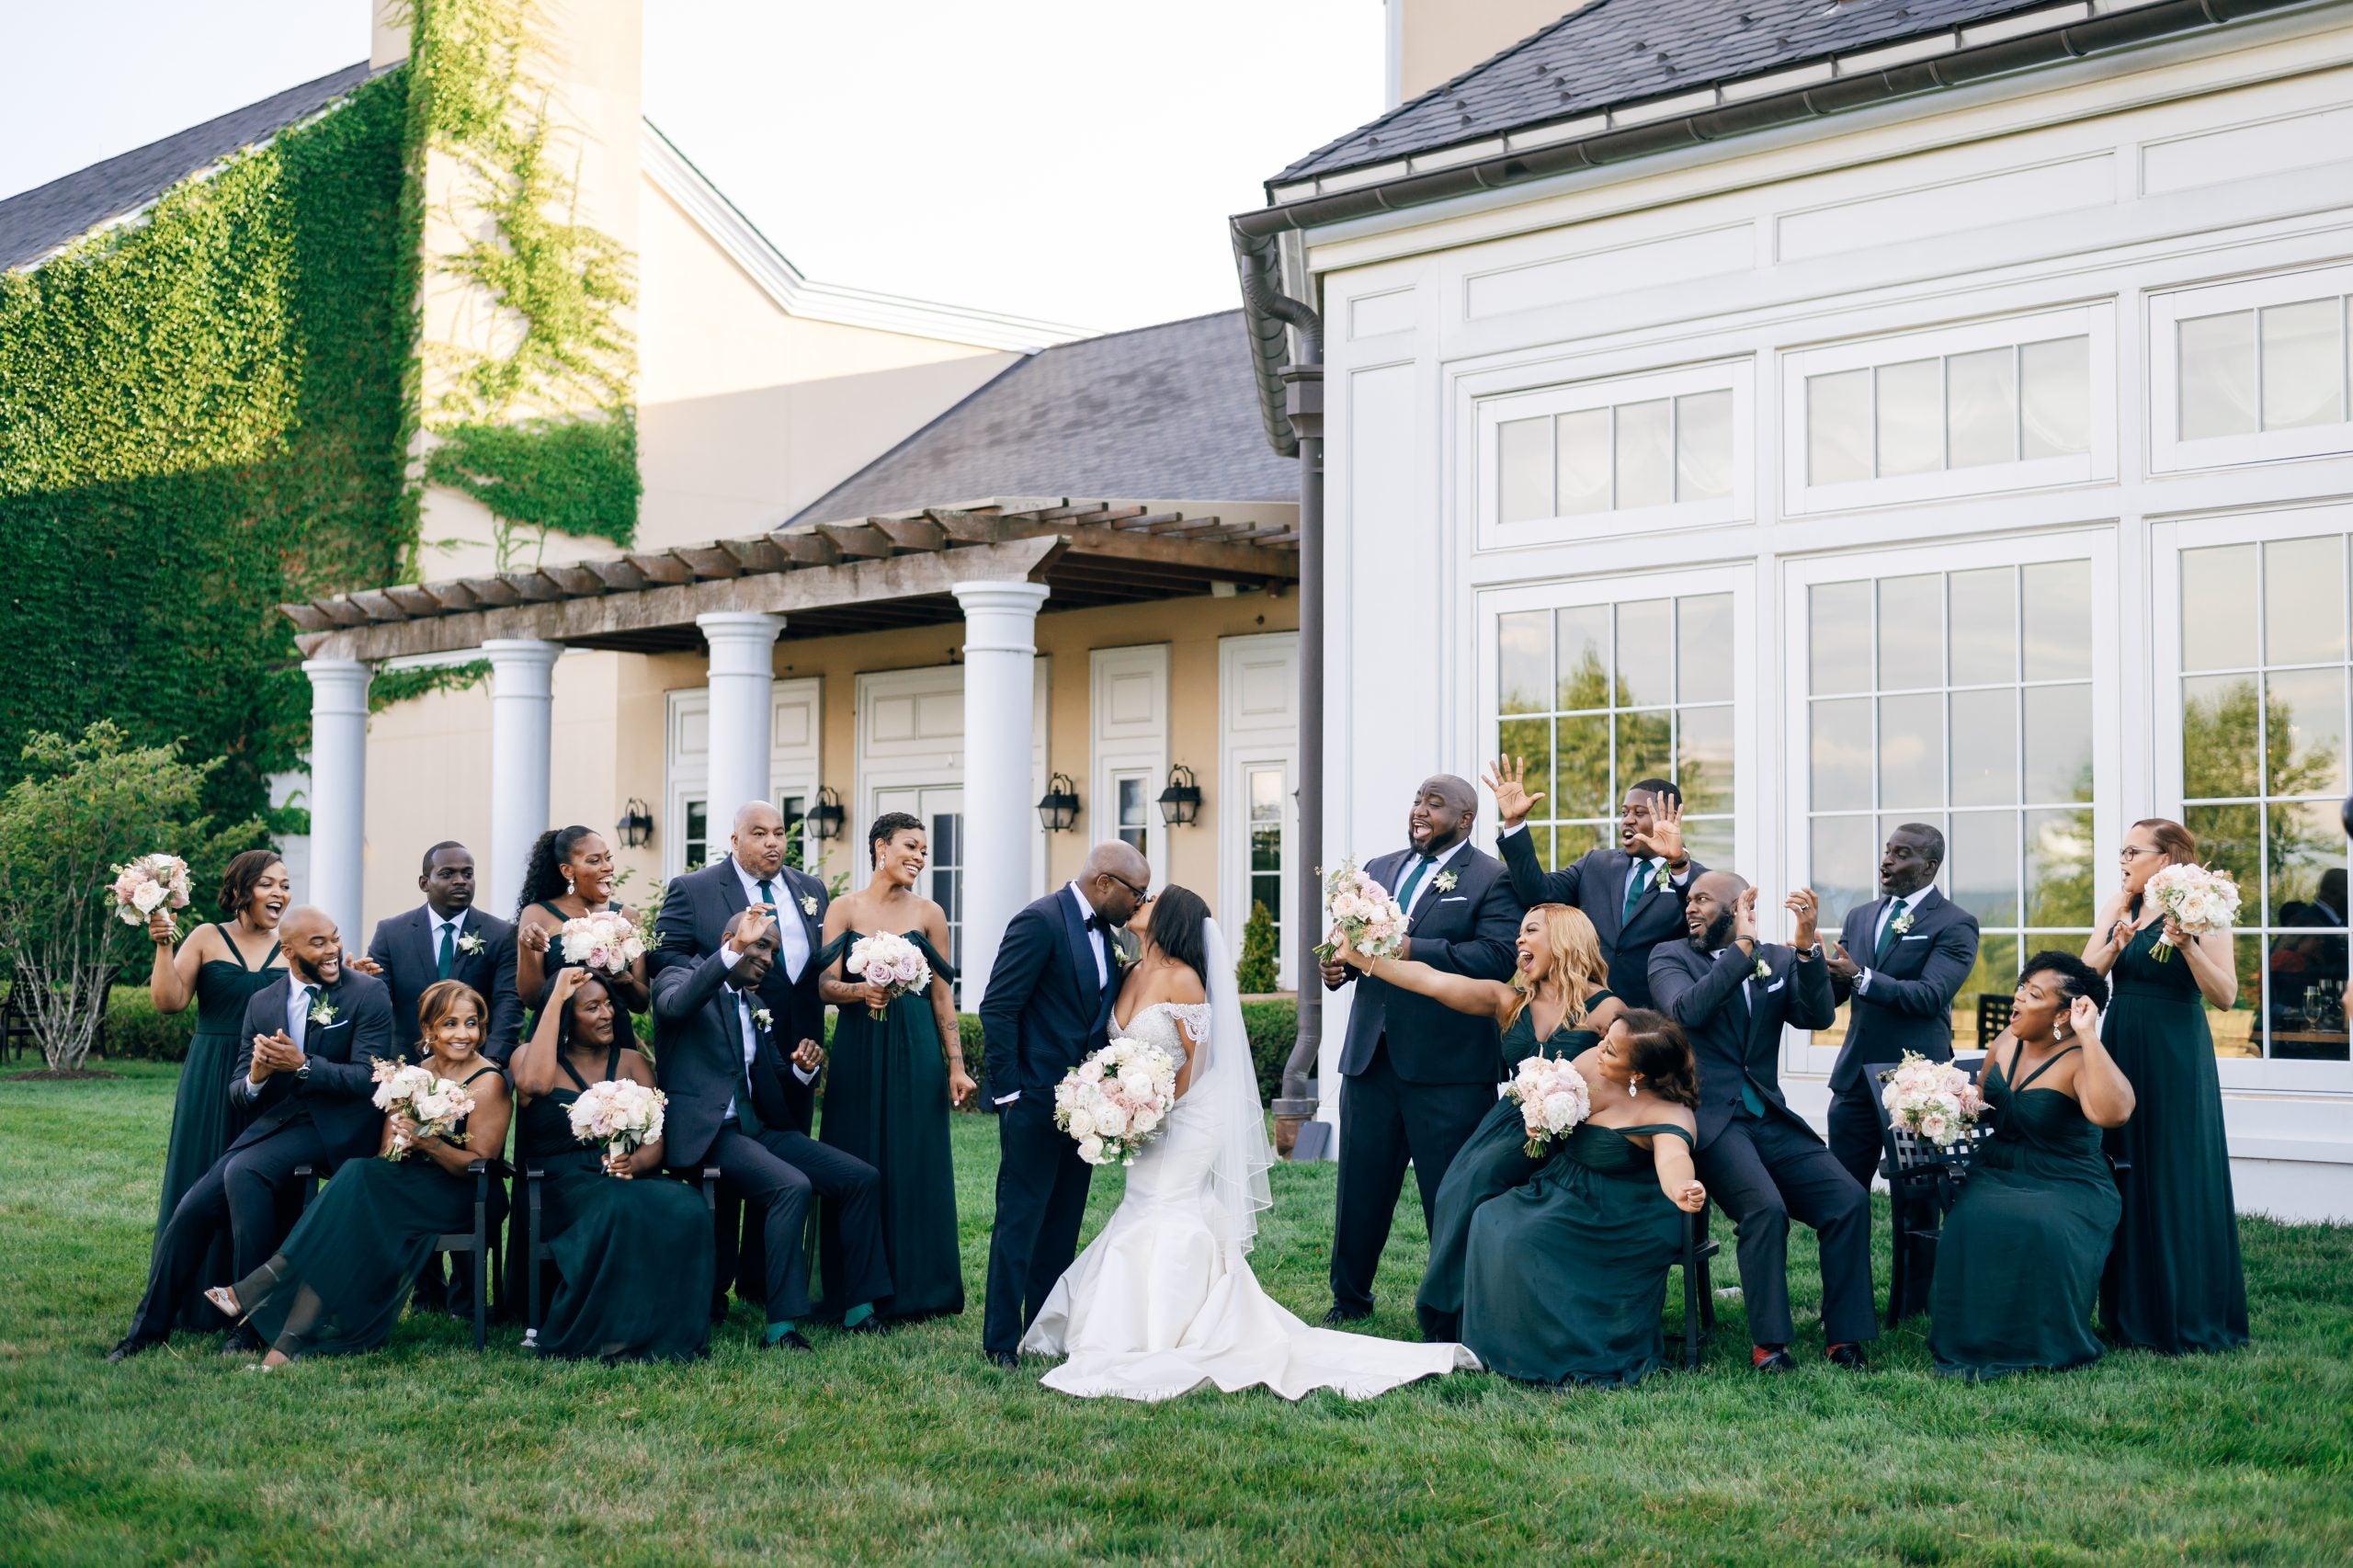 Bridal Bliss: Natasha And Michael's Wedding Was The 'Bashment' Of The Summer